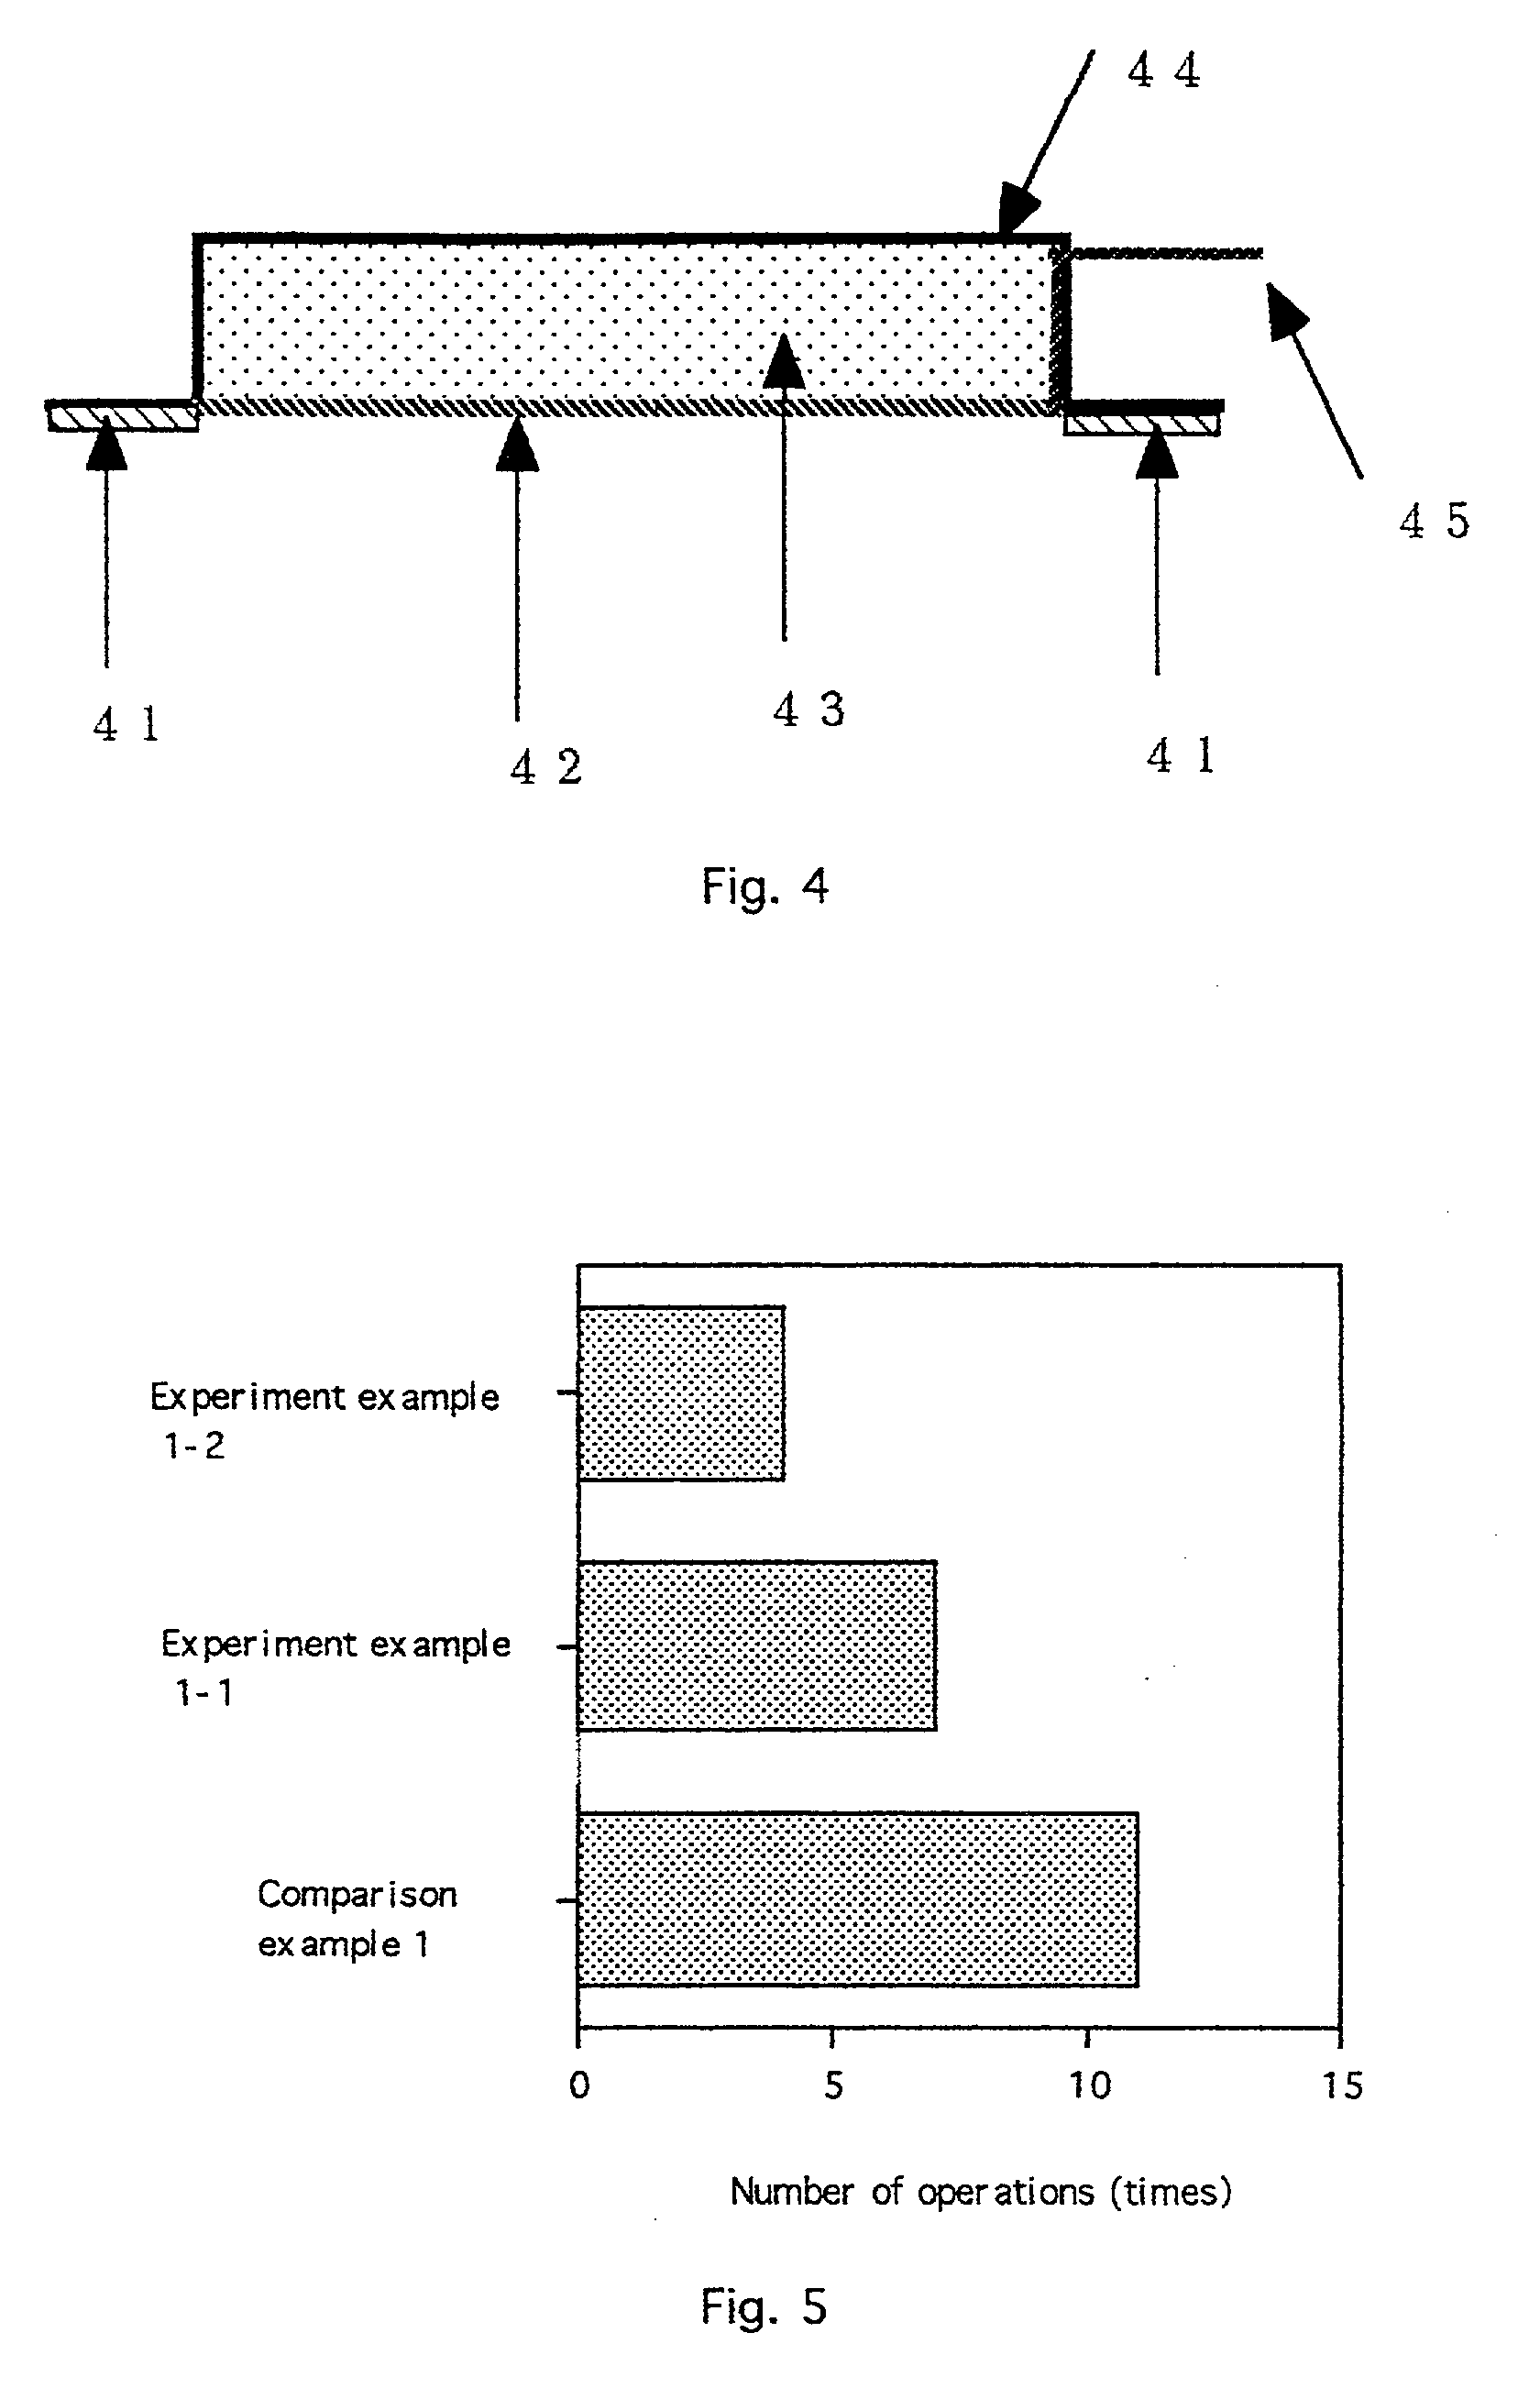 Apparatus and method for in vivo delivery of therapeutic agents